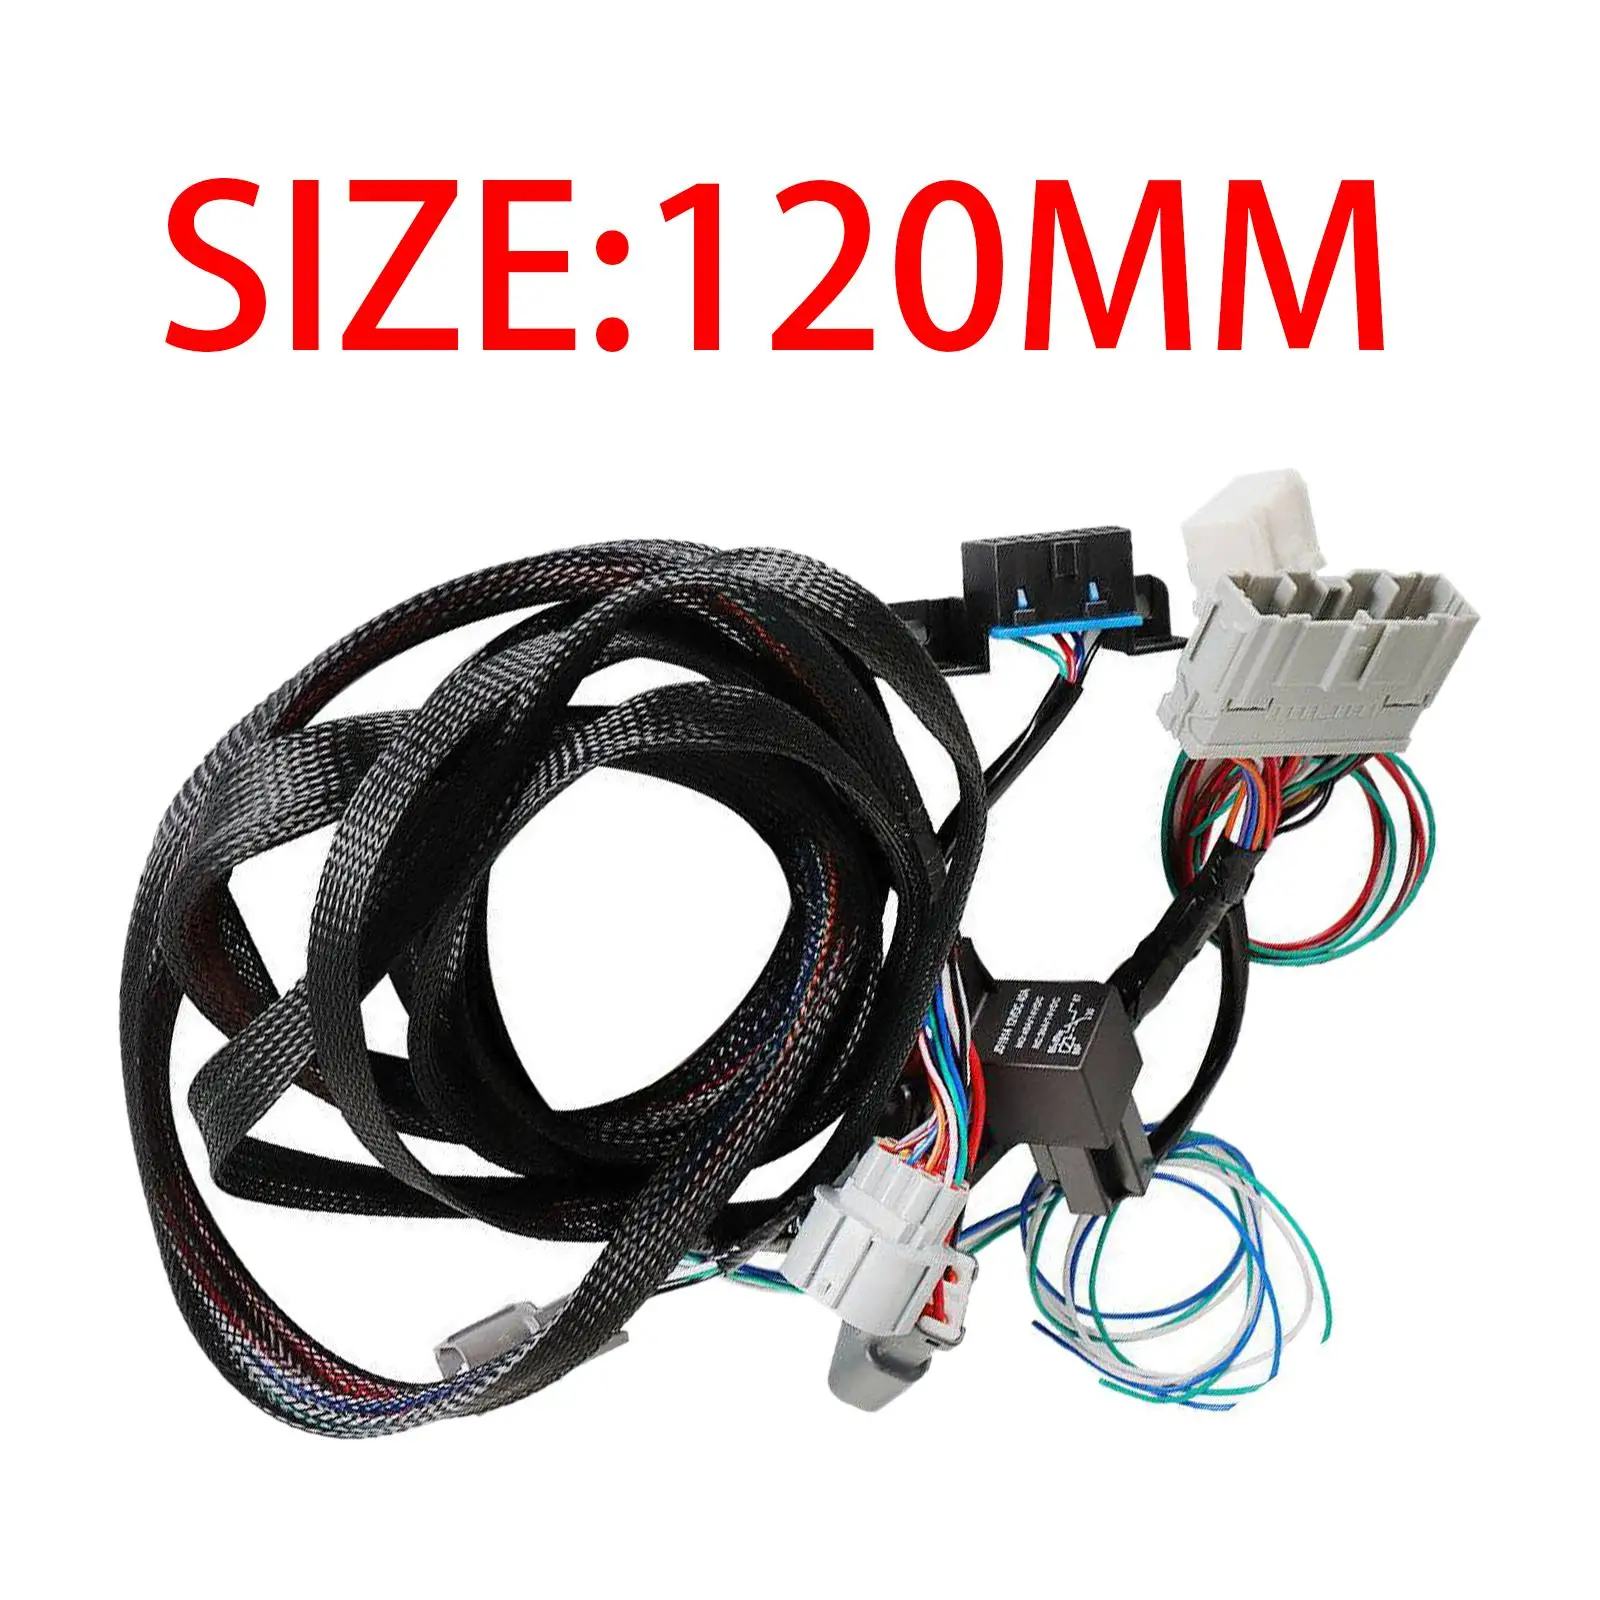 Durable Conversion Wiring Harness Modification Replacement Parts Accessory Auto for Civic Del Sol with K Swap 1993-1997